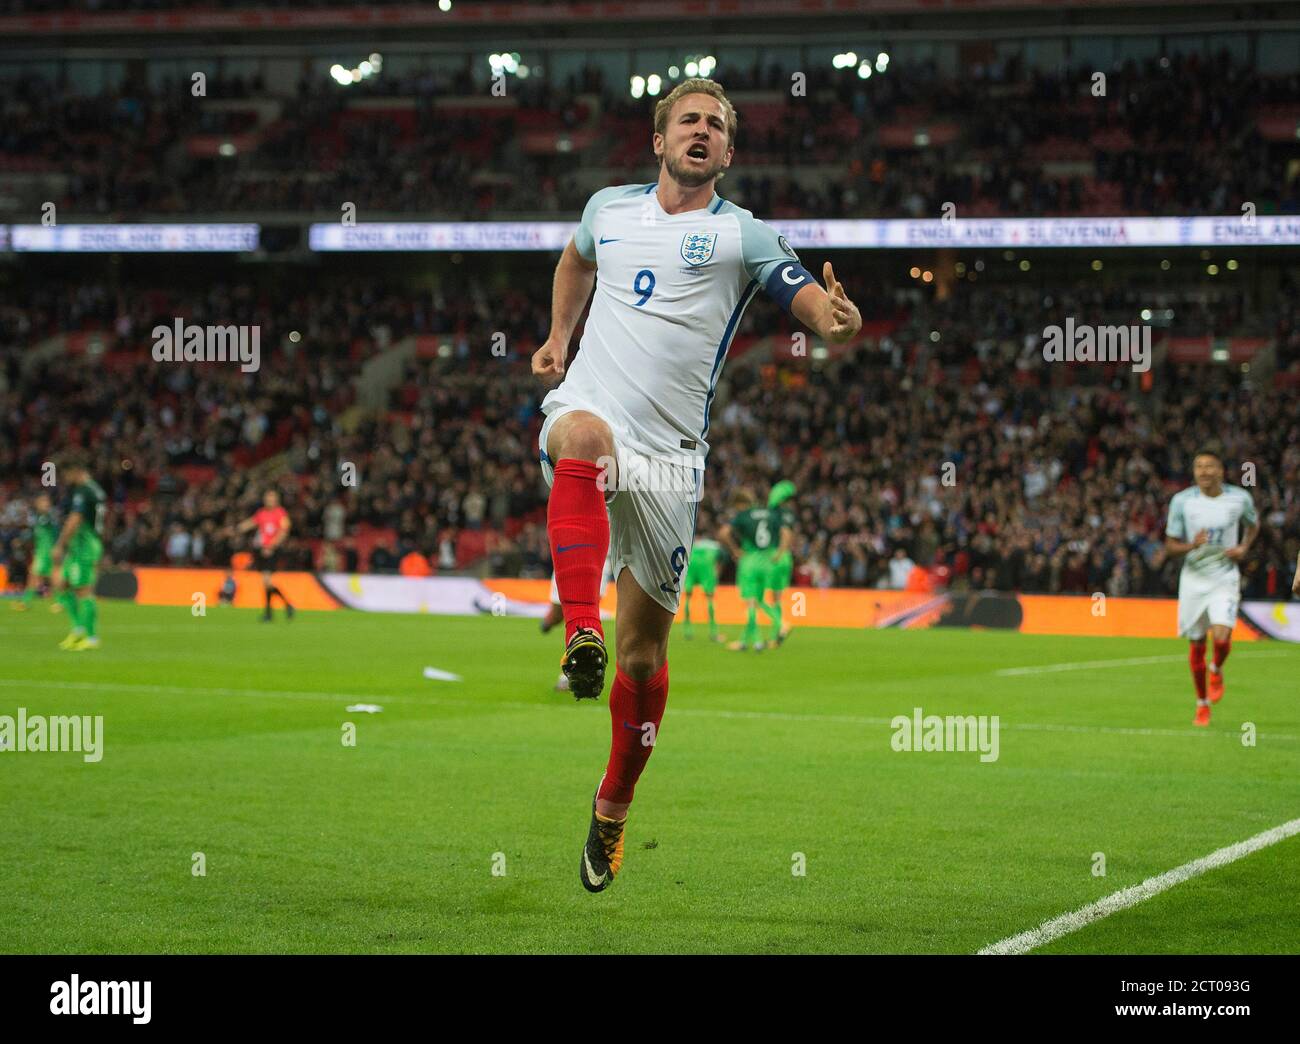 HARRY KANE CELEBRATES SCORING ENGLAND'S WINNING GOAL THAT SEES THEM QUALIFY FOR THE 2018 WORLD CUP. ENGLAND v SLOVENIA. PICTURE : © MARK PAIN / ALAMY Stock Photo